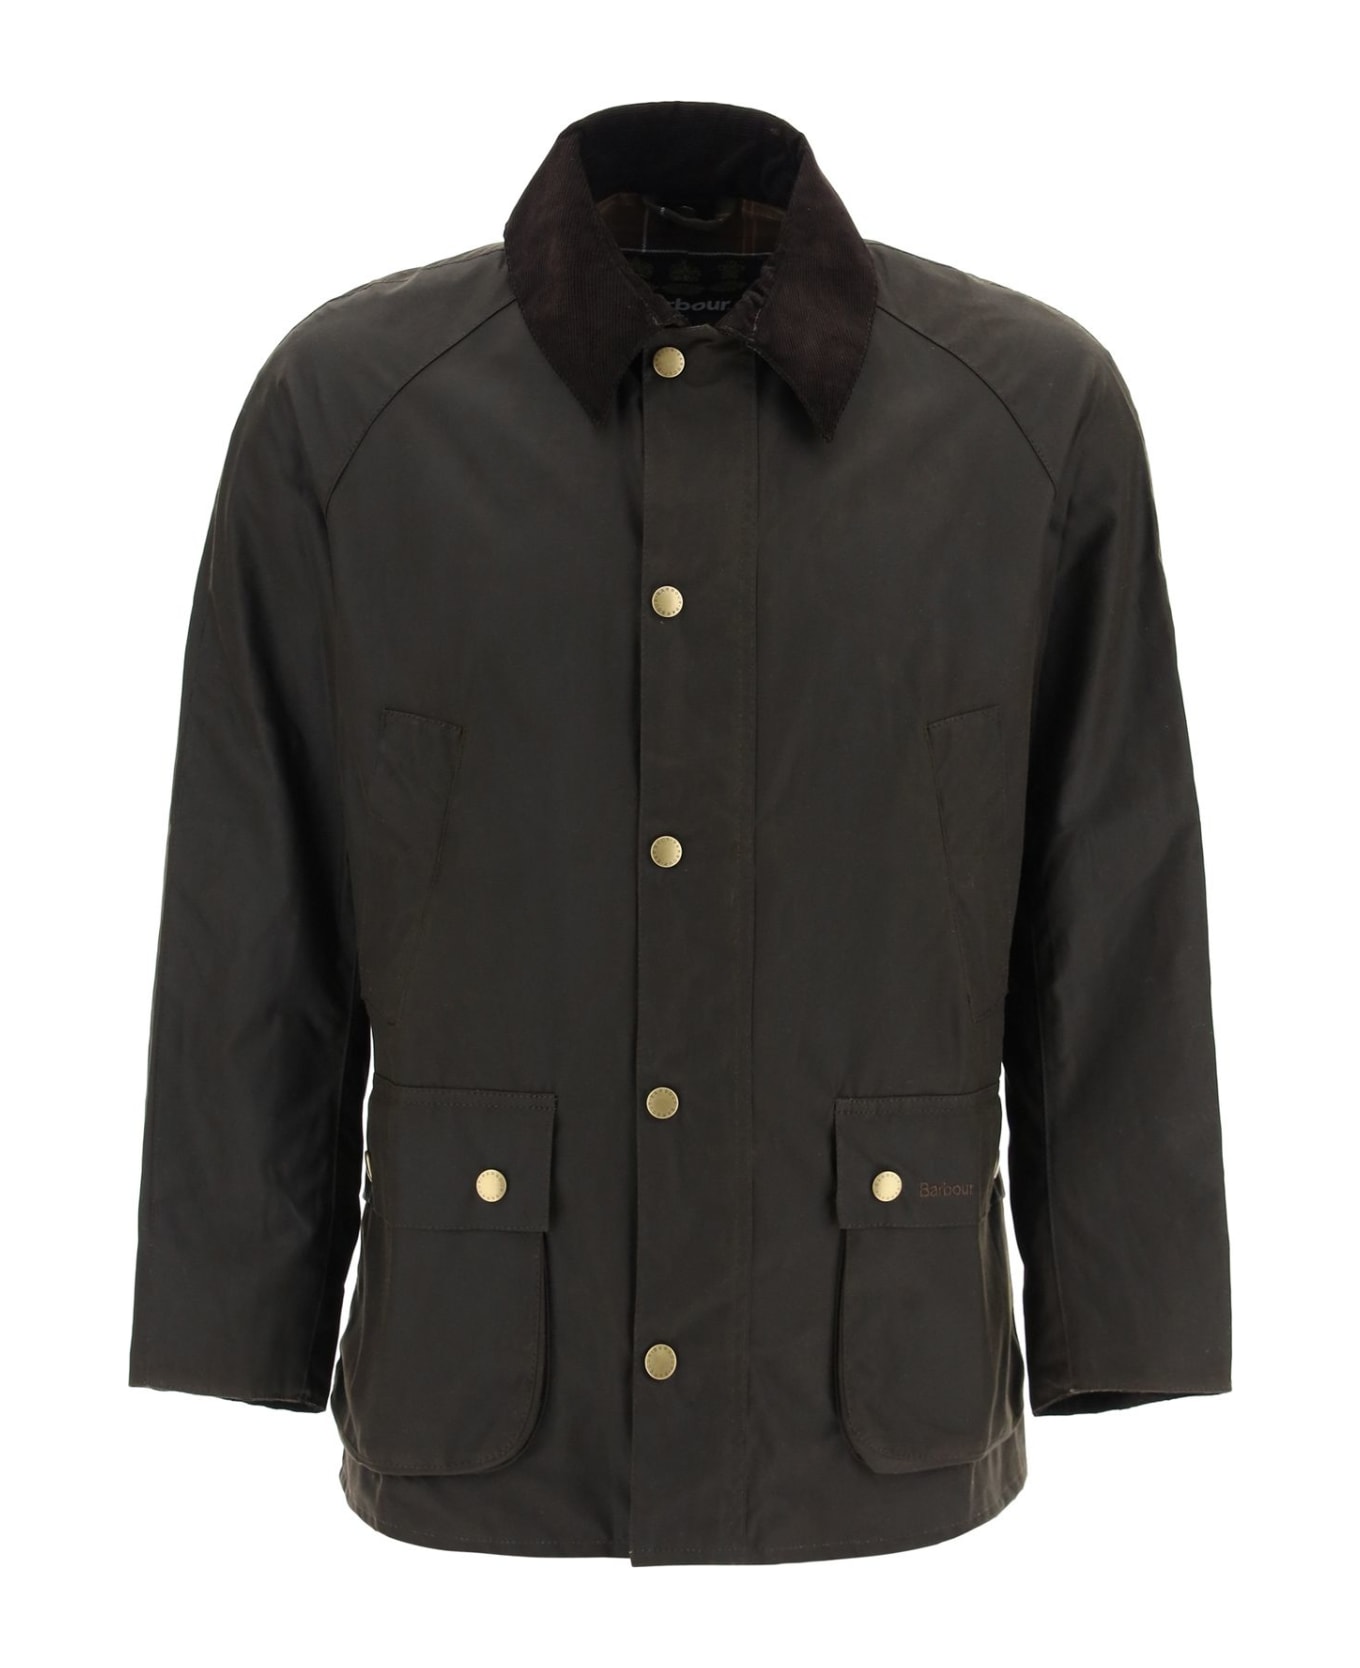 Barbour Ashby Wax Waxed Cotton Jacket - brown